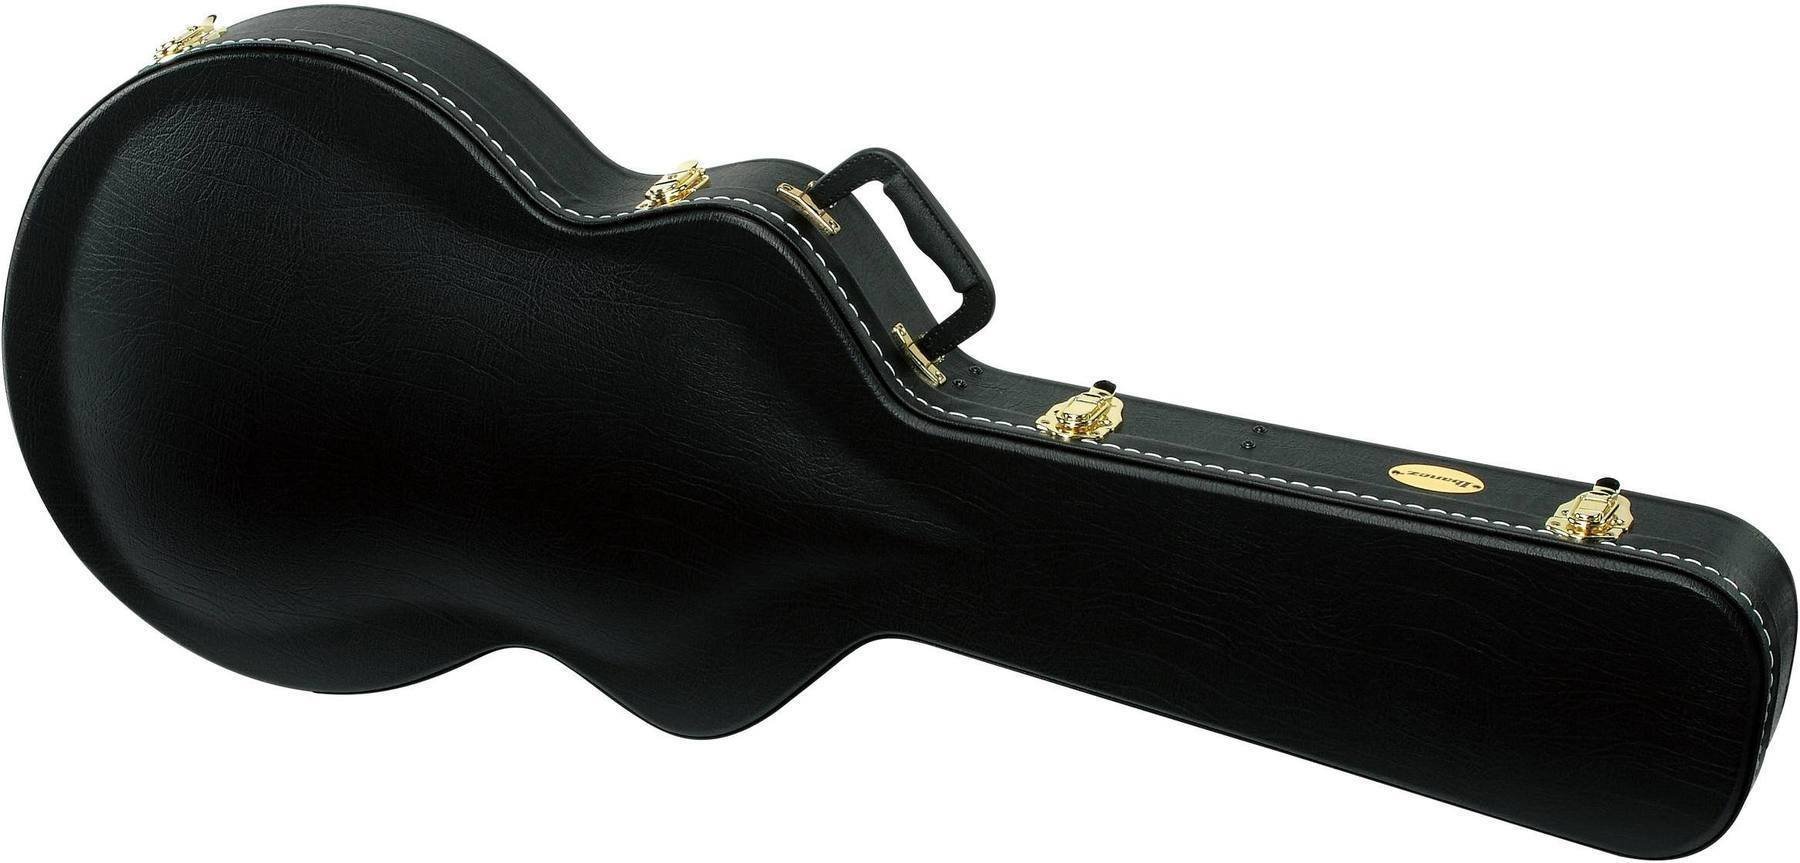 Case for Acoustic Guitar Ibanez AGS-C Case for Acoustic Guitar